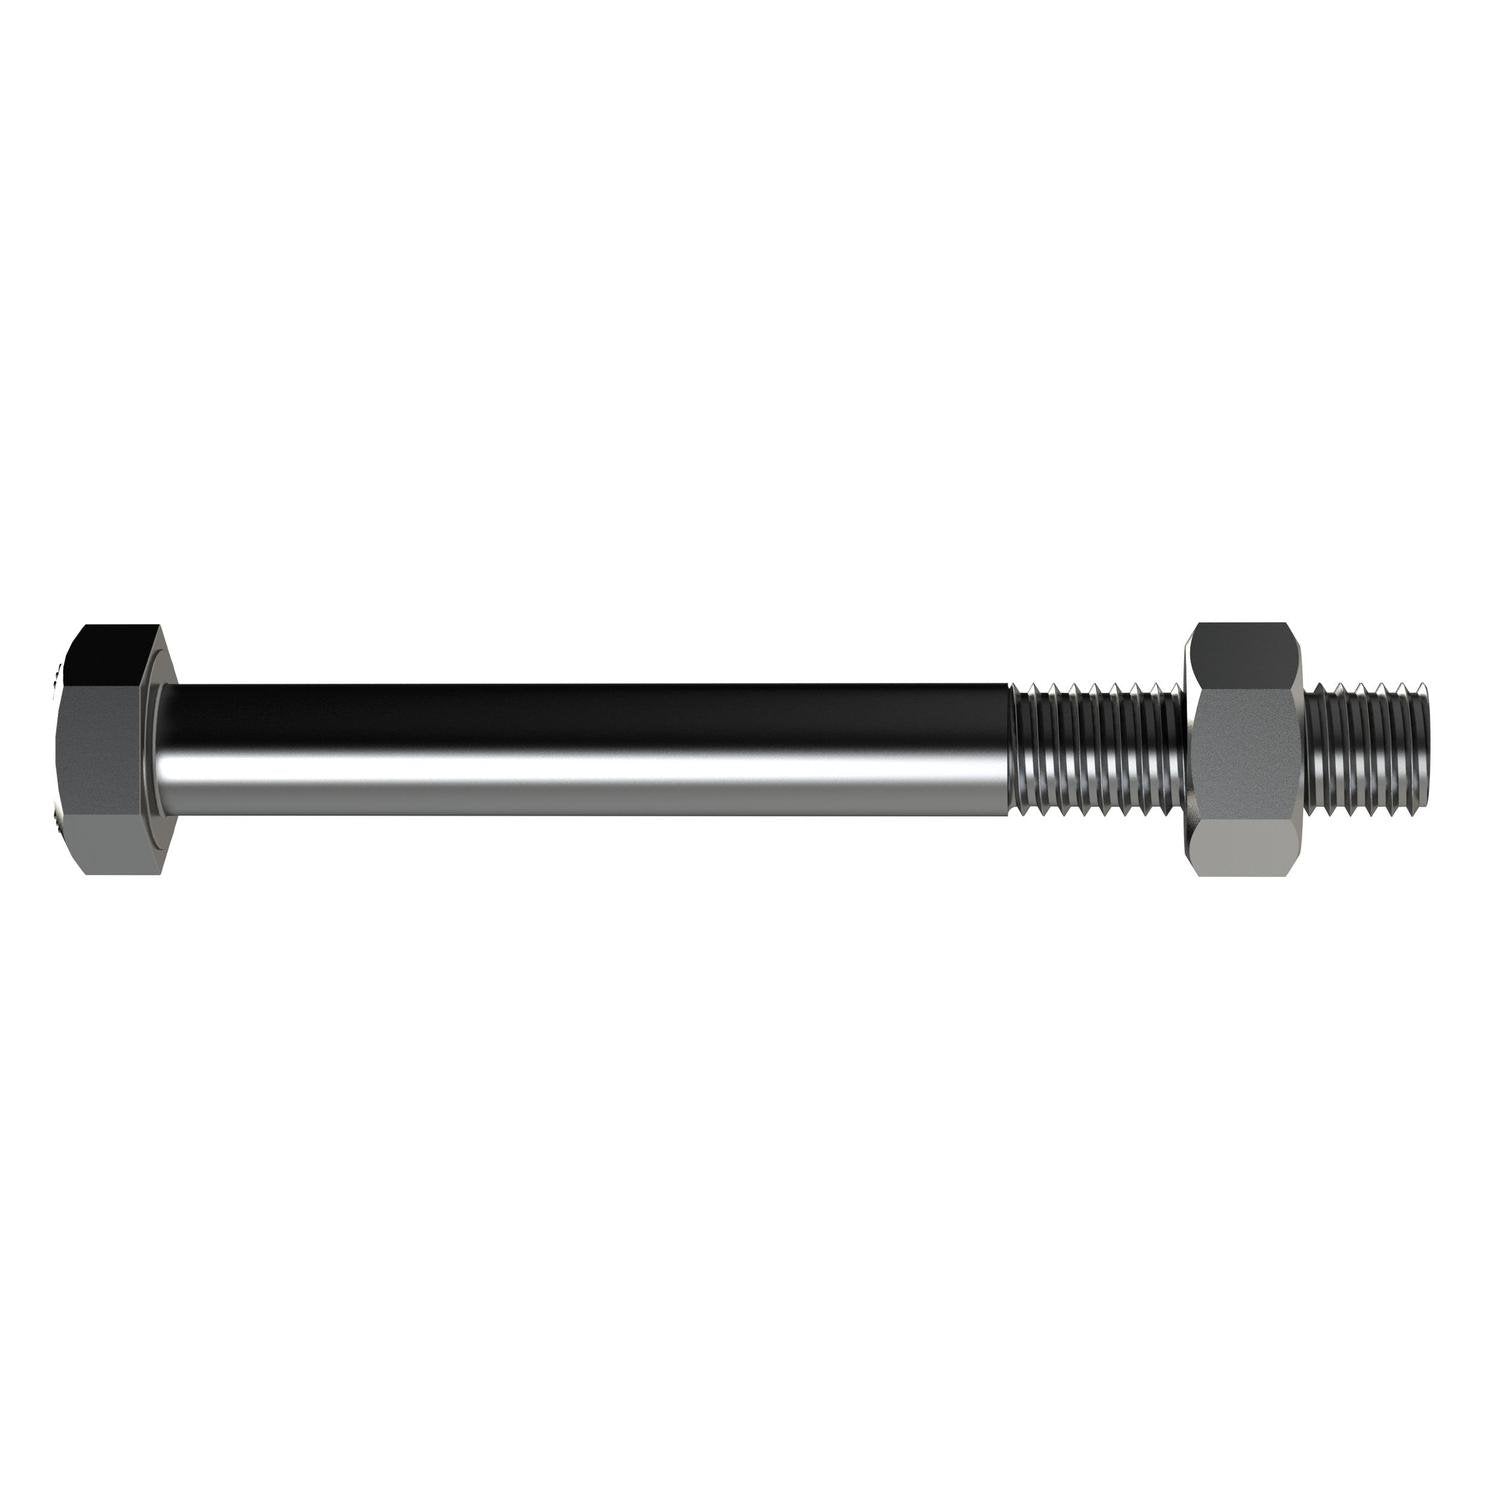 Bremick Engineer Bolt & Nut M16 X 280Mm Stainless Steel